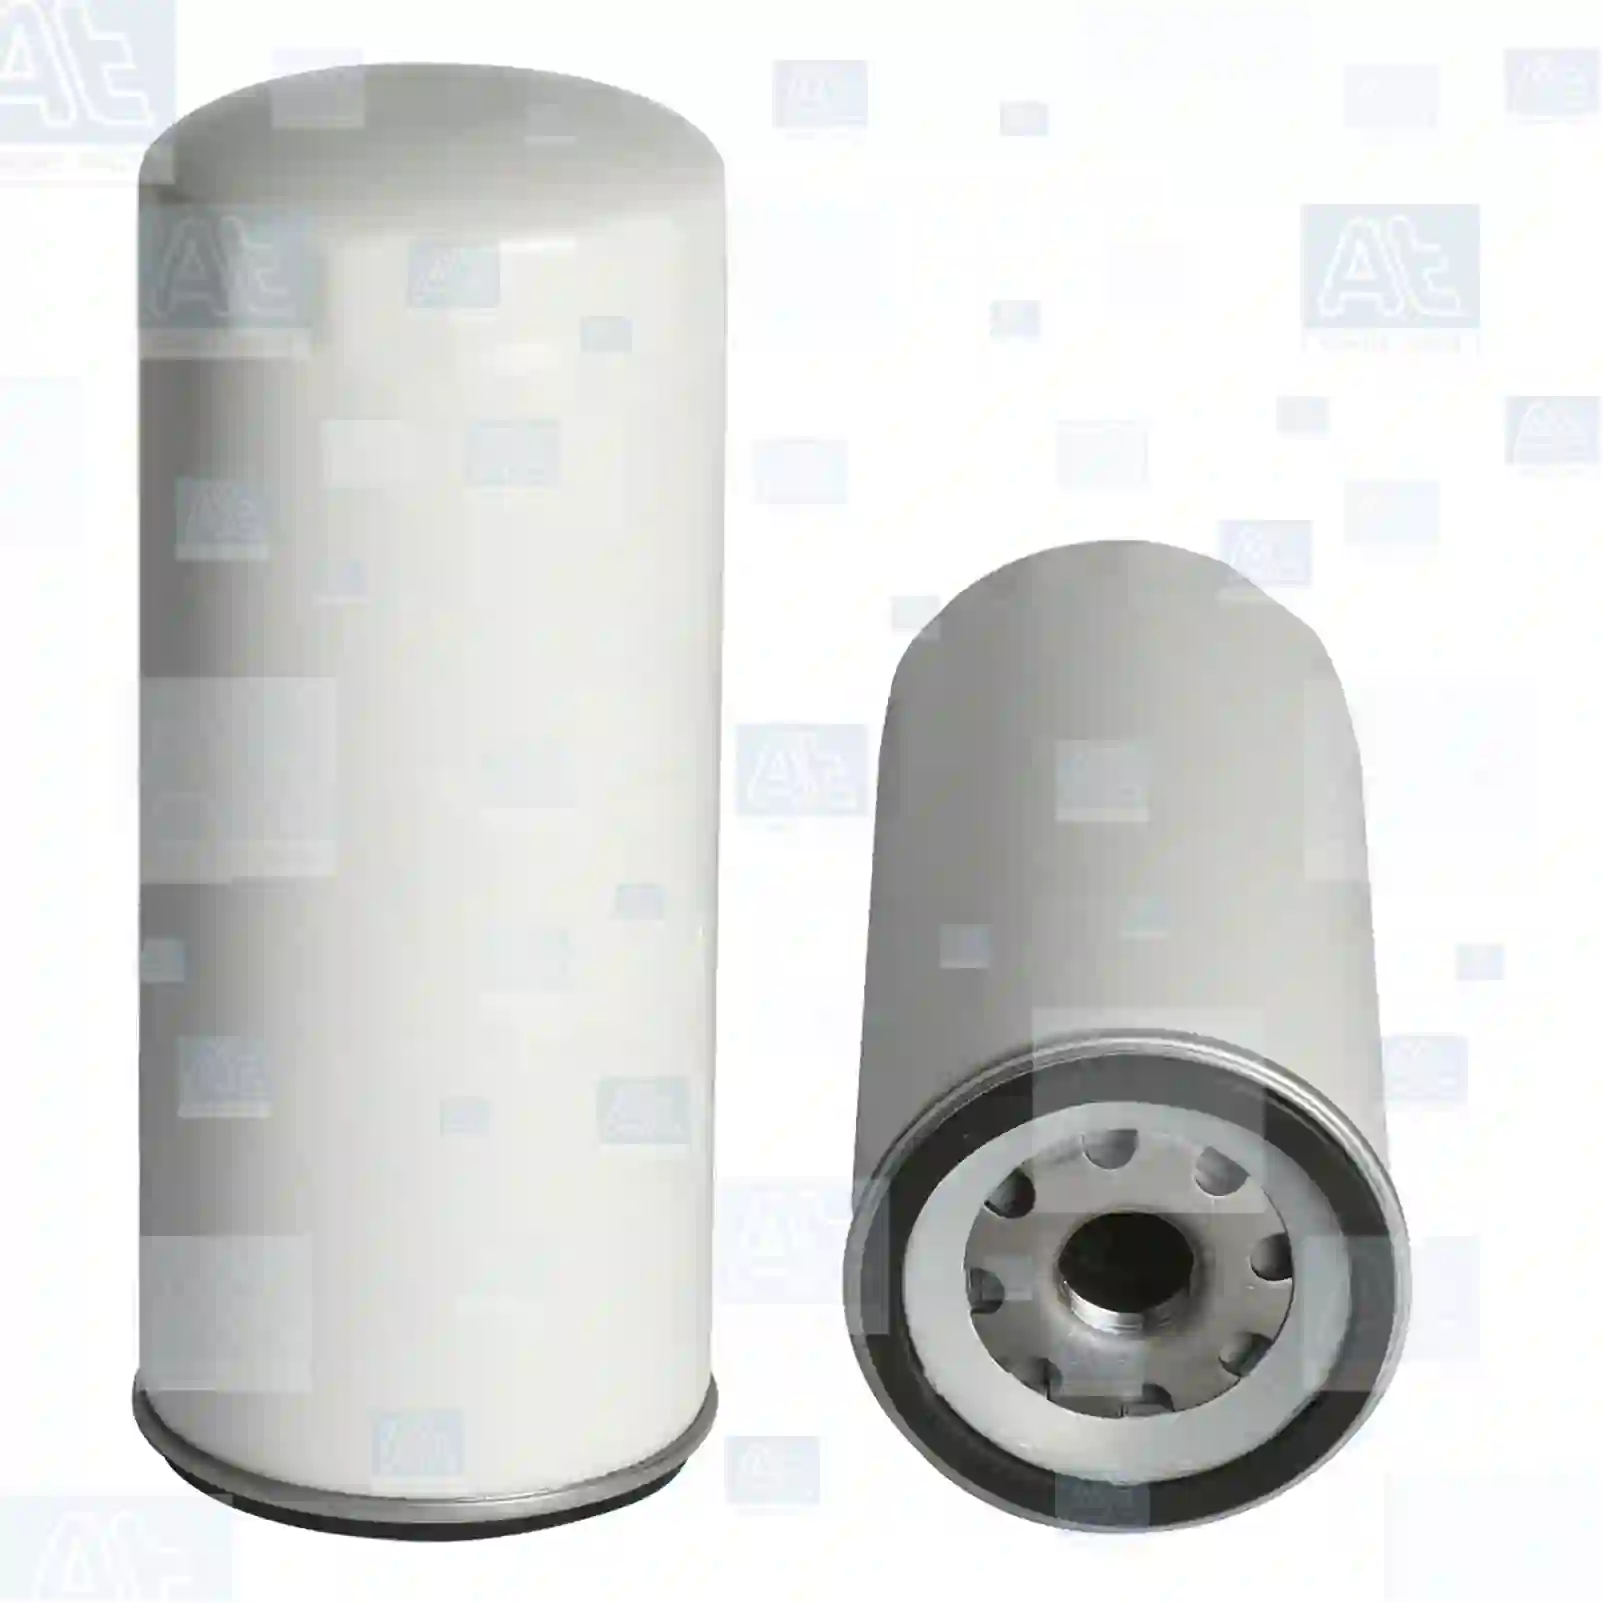 Oil filter, at no 77700094, oem no: 40367914, 99100562, 485GB3191, 1R-0658, 1R-0739, 1R-1807, 1W-3300, 2P-4004, 3Y0-900X, 5P-1119, 0003600140, 69704773, 988693, 98869300, 01174420, D5000681013, GH27096, 42537127, 99100562, Y03601712, Y03725604, Y05008003, Y05809611, YO3601712, YO5008003, 5011417, 5011502, ABPN10GLF3675, DNP553191, H27096, 6439393, 6439392, 9414100547, H200W23, H200W24, 5221170569, 42537127, 42546374, 500055336, 5001021129, 5010550600, 01/798593, 5010550600, 7211206, 20539275, 21707136, 2191P553191, 21939324, 484GB3191C, 485GB3191, 485GB3191A, 485GB3191B, 485GB3191C, 485GB3191D, 485GB3232, 5000133555, 51055040056, 81332150011, 5010550600, 3661840255, 52211-70569, 52217-06577, W1250599, 0020709459, 485GB3191A, 485GB3191B, 5000133555, 5000670699, 5000670700, 5000670701, 5000670796, 500067079L, 5000681013, 5000682146, 5001021129, 5001546650, 5001846641, 5001846642, 5010550600, 7421700201, 7423114230, LUS4417, PH4849, 1117285, 1117295, 1347726, 2059778, 2077885, 1216400551, 5221170569, 5221706577, 21401064, 21707134, 3130936, 466634, 4666343, 4787362, 4797362, 60466634, 6884417, 85114041, ZG01695-0008 At Spare Part | Engine, Accelerator Pedal, Camshaft, Connecting Rod, Crankcase, Crankshaft, Cylinder Head, Engine Suspension Mountings, Exhaust Manifold, Exhaust Gas Recirculation, Filter Kits, Flywheel Housing, General Overhaul Kits, Engine, Intake Manifold, Oil Cleaner, Oil Cooler, Oil Filter, Oil Pump, Oil Sump, Piston & Liner, Sensor & Switch, Timing Case, Turbocharger, Cooling System, Belt Tensioner, Coolant Filter, Coolant Pipe, Corrosion Prevention Agent, Drive, Expansion Tank, Fan, Intercooler, Monitors & Gauges, Radiator, Thermostat, V-Belt / Timing belt, Water Pump, Fuel System, Electronical Injector Unit, Feed Pump, Fuel Filter, cpl., Fuel Gauge Sender,  Fuel Line, Fuel Pump, Fuel Tank, Injection Line Kit, Injection Pump, Exhaust System, Clutch & Pedal, Gearbox, Propeller Shaft, Axles, Brake System, Hubs & Wheels, Suspension, Leaf Spring, Universal Parts / Accessories, Steering, Electrical System, Cabin Oil filter, at no 77700094, oem no: 40367914, 99100562, 485GB3191, 1R-0658, 1R-0739, 1R-1807, 1W-3300, 2P-4004, 3Y0-900X, 5P-1119, 0003600140, 69704773, 988693, 98869300, 01174420, D5000681013, GH27096, 42537127, 99100562, Y03601712, Y03725604, Y05008003, Y05809611, YO3601712, YO5008003, 5011417, 5011502, ABPN10GLF3675, DNP553191, H27096, 6439393, 6439392, 9414100547, H200W23, H200W24, 5221170569, 42537127, 42546374, 500055336, 5001021129, 5010550600, 01/798593, 5010550600, 7211206, 20539275, 21707136, 2191P553191, 21939324, 484GB3191C, 485GB3191, 485GB3191A, 485GB3191B, 485GB3191C, 485GB3191D, 485GB3232, 5000133555, 51055040056, 81332150011, 5010550600, 3661840255, 52211-70569, 52217-06577, W1250599, 0020709459, 485GB3191A, 485GB3191B, 5000133555, 5000670699, 5000670700, 5000670701, 5000670796, 500067079L, 5000681013, 5000682146, 5001021129, 5001546650, 5001846641, 5001846642, 5010550600, 7421700201, 7423114230, LUS4417, PH4849, 1117285, 1117295, 1347726, 2059778, 2077885, 1216400551, 5221170569, 5221706577, 21401064, 21707134, 3130936, 466634, 4666343, 4787362, 4797362, 60466634, 6884417, 85114041, ZG01695-0008 At Spare Part | Engine, Accelerator Pedal, Camshaft, Connecting Rod, Crankcase, Crankshaft, Cylinder Head, Engine Suspension Mountings, Exhaust Manifold, Exhaust Gas Recirculation, Filter Kits, Flywheel Housing, General Overhaul Kits, Engine, Intake Manifold, Oil Cleaner, Oil Cooler, Oil Filter, Oil Pump, Oil Sump, Piston & Liner, Sensor & Switch, Timing Case, Turbocharger, Cooling System, Belt Tensioner, Coolant Filter, Coolant Pipe, Corrosion Prevention Agent, Drive, Expansion Tank, Fan, Intercooler, Monitors & Gauges, Radiator, Thermostat, V-Belt / Timing belt, Water Pump, Fuel System, Electronical Injector Unit, Feed Pump, Fuel Filter, cpl., Fuel Gauge Sender,  Fuel Line, Fuel Pump, Fuel Tank, Injection Line Kit, Injection Pump, Exhaust System, Clutch & Pedal, Gearbox, Propeller Shaft, Axles, Brake System, Hubs & Wheels, Suspension, Leaf Spring, Universal Parts / Accessories, Steering, Electrical System, Cabin